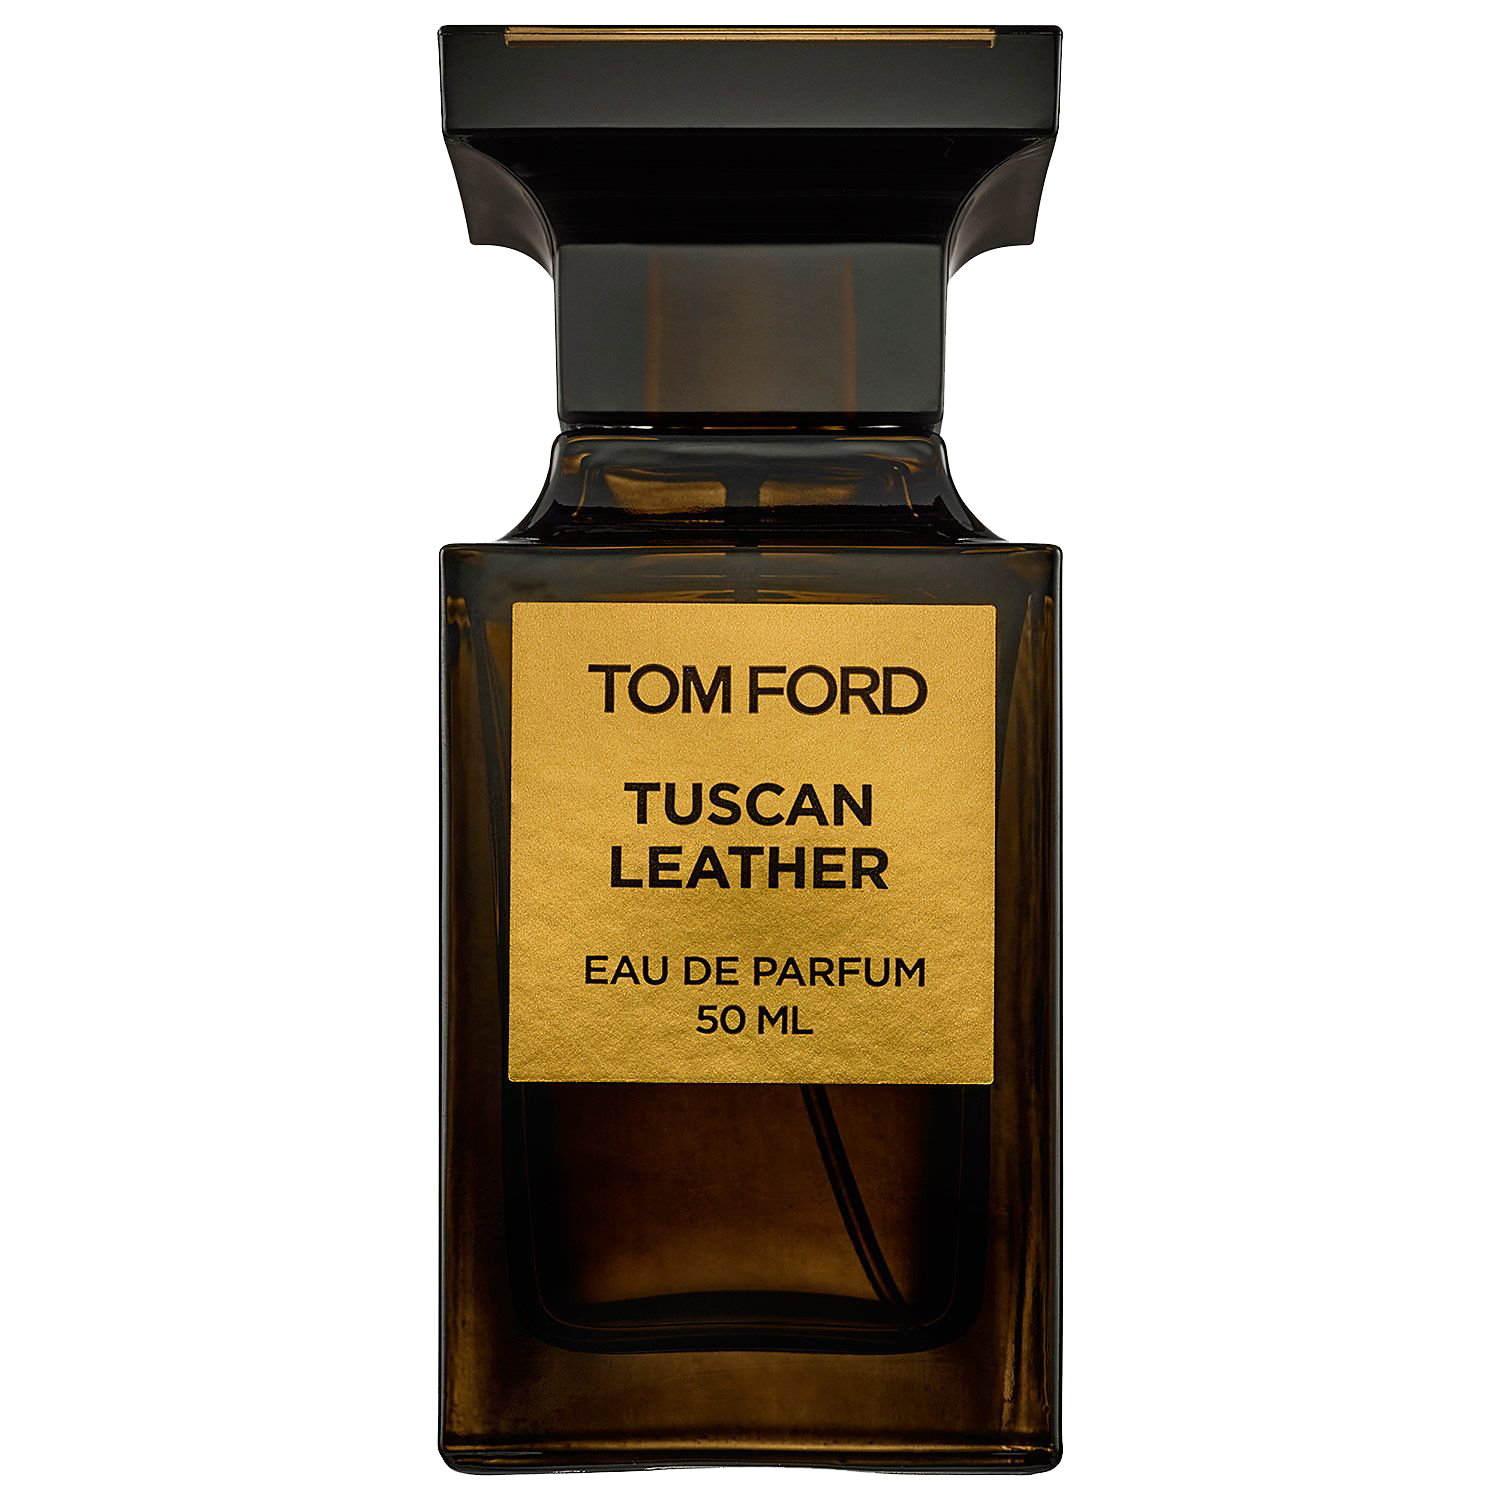 Top 42+ imagen tuscan leather tom ford - Abzlocal.mx